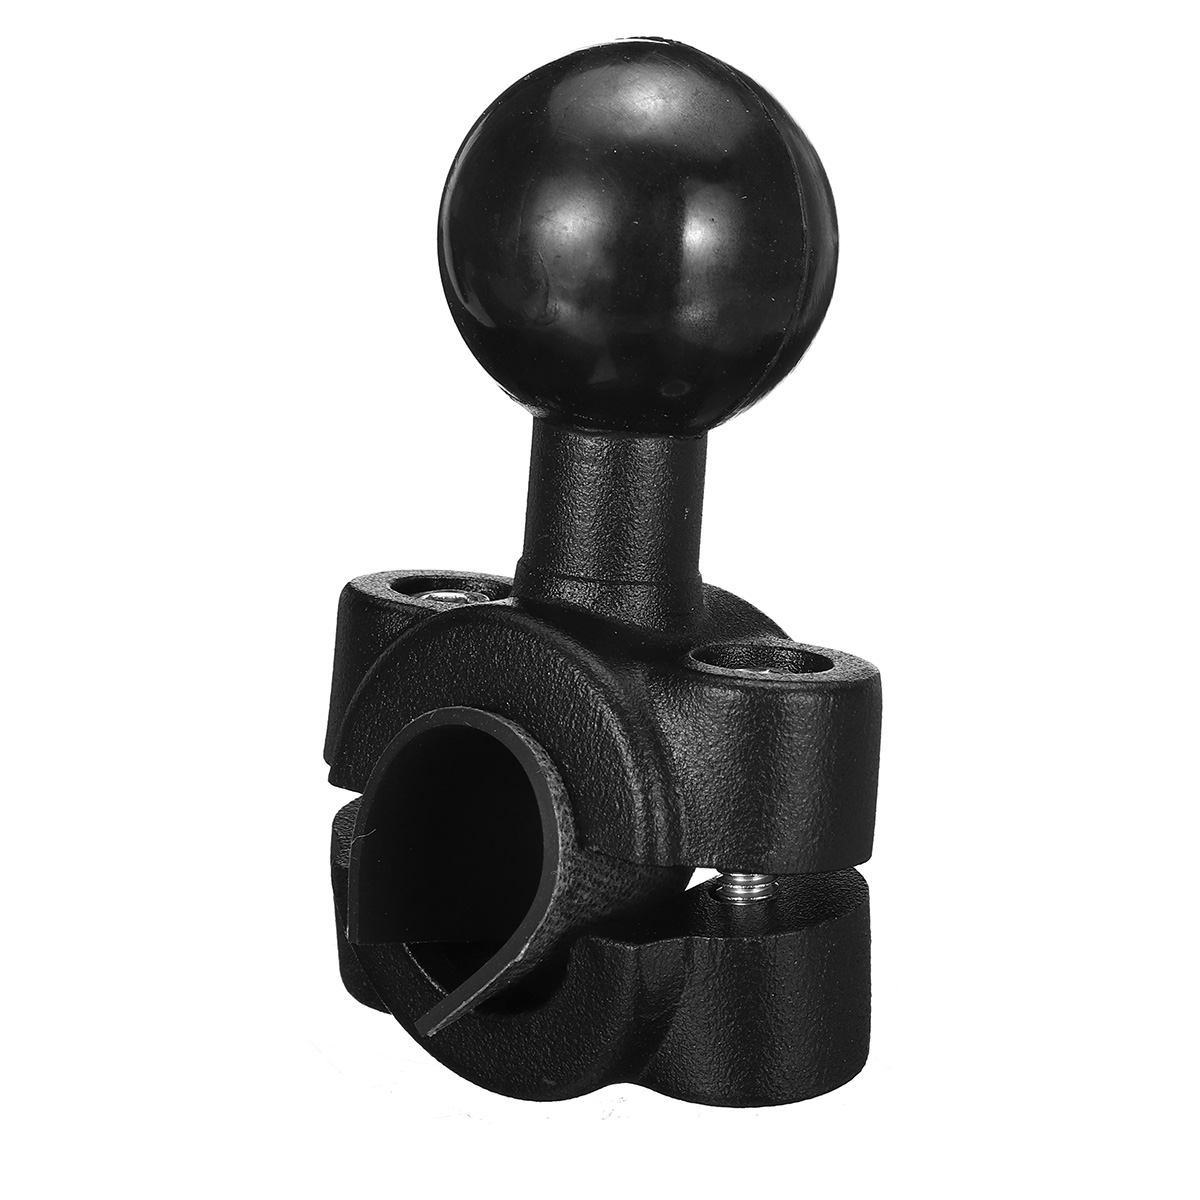 Mini Rail Base with 1" Ball for Motorcycle 0.35" to 0.61" Diameter Handlebar Mount